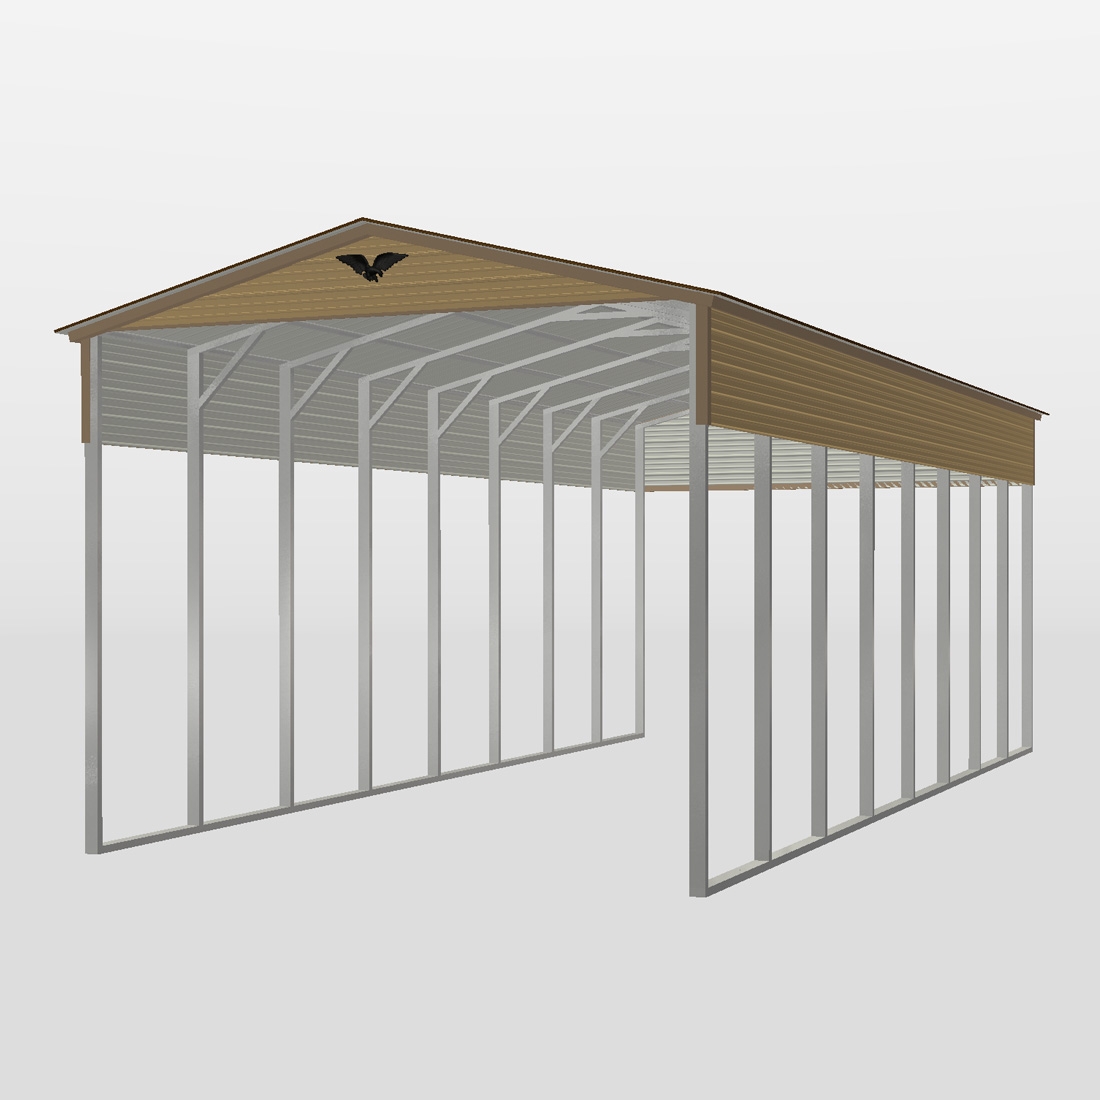 18x30x14 Metal RV Cover - Vertical Roof - Eagle Carports